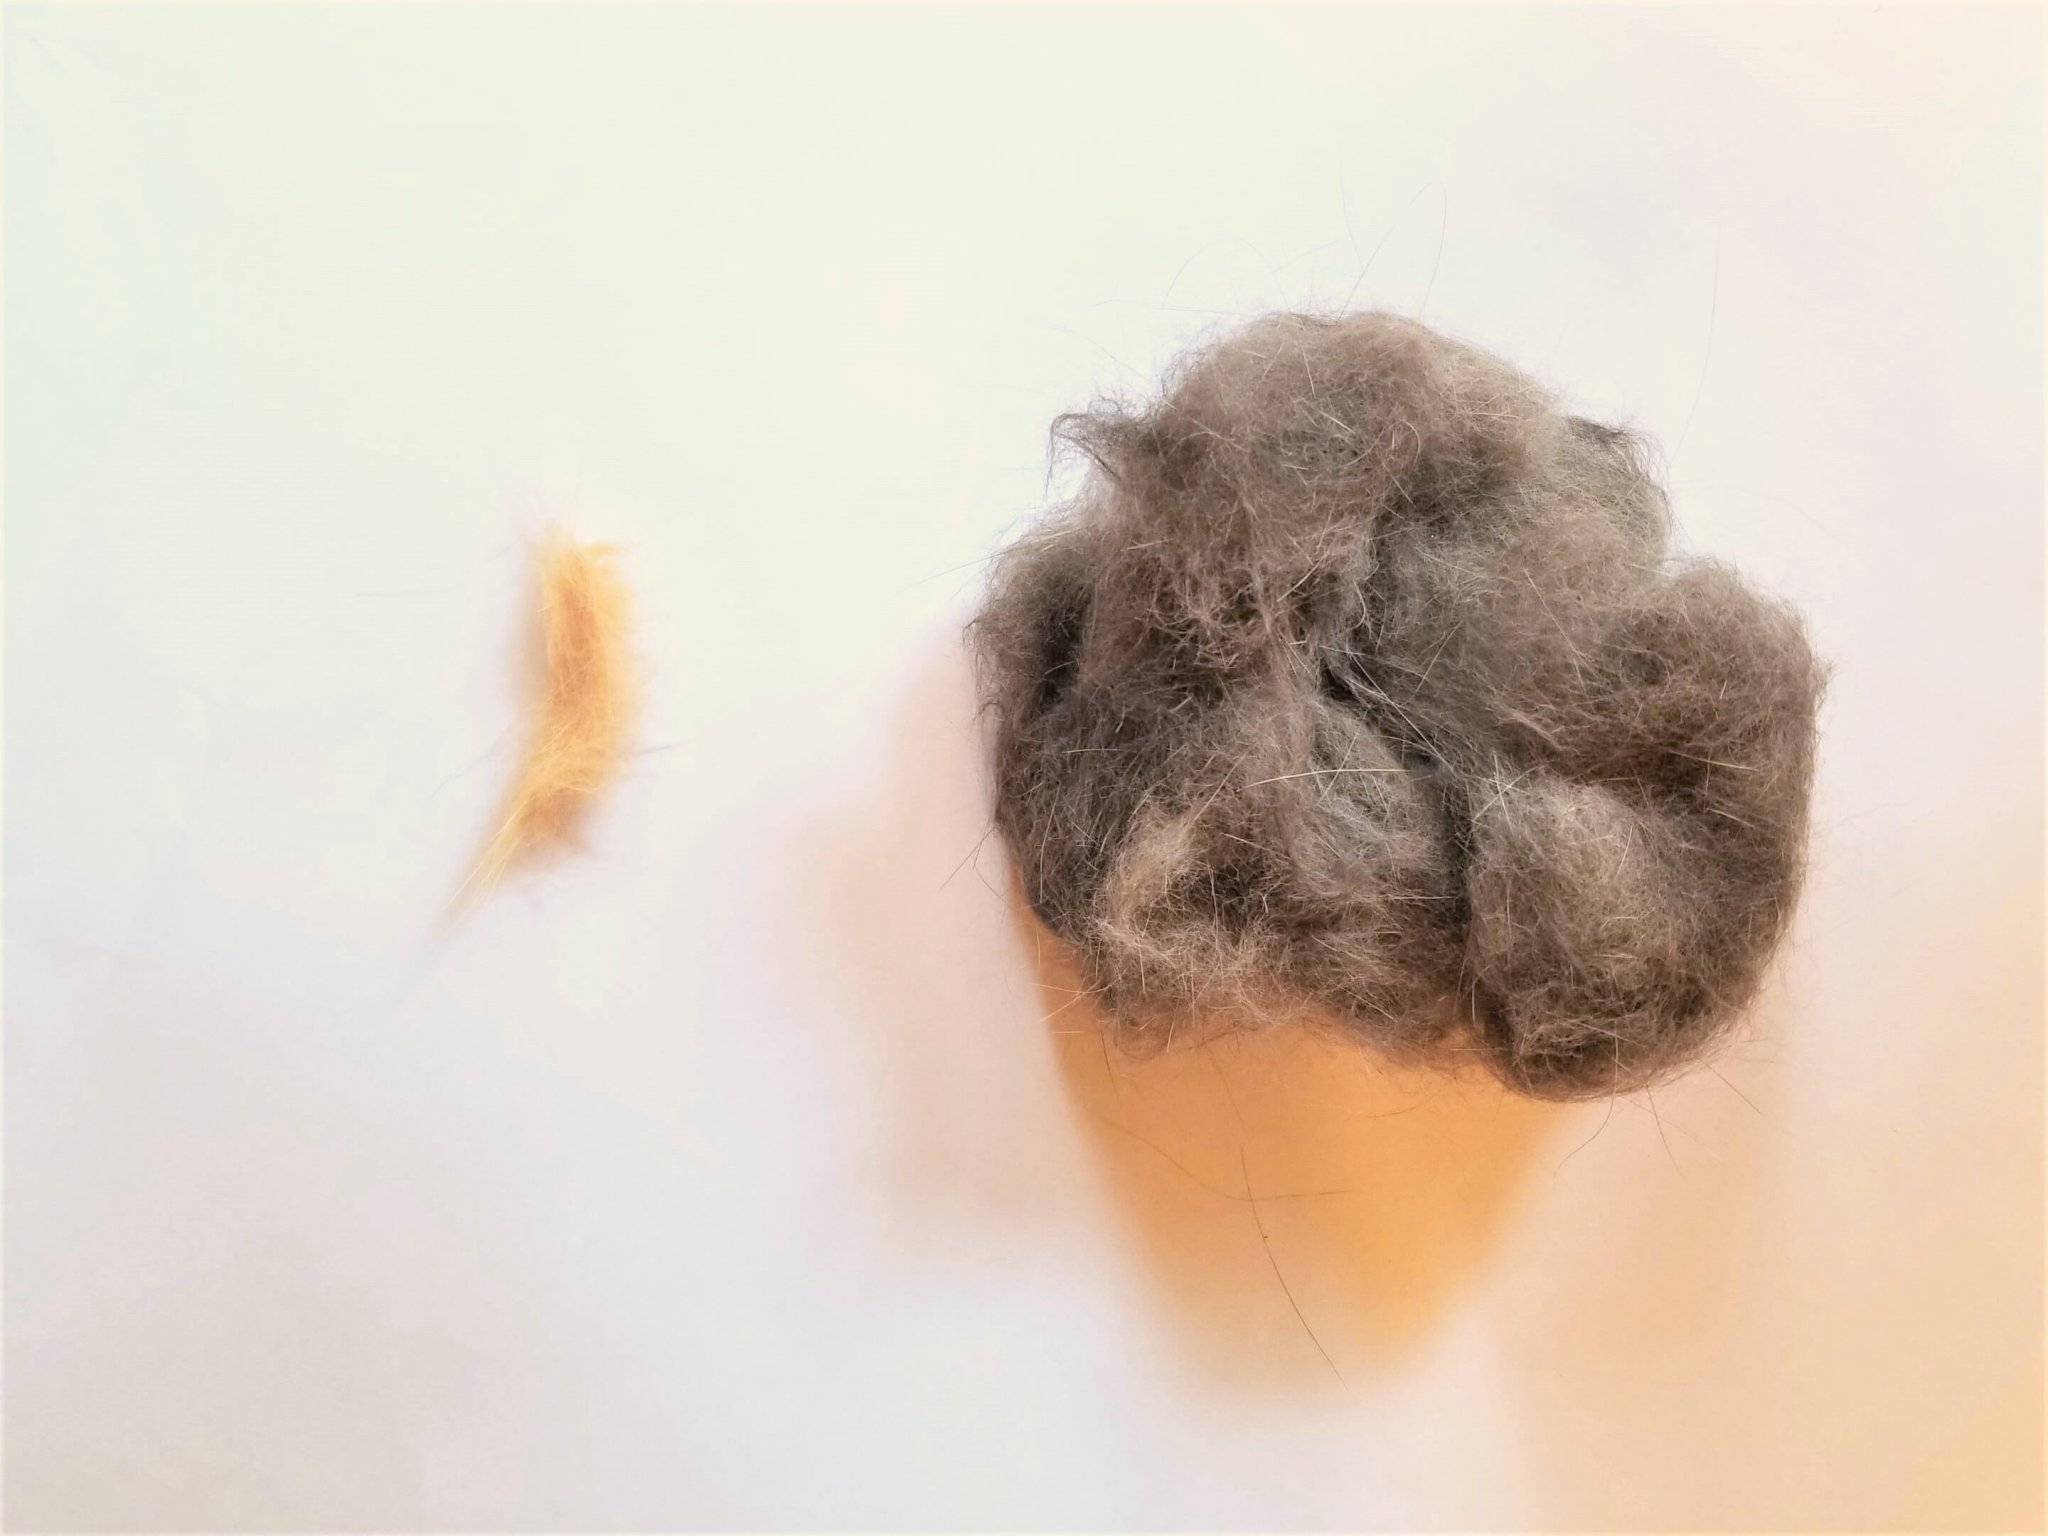 The Eazee Cat Deshedding Tool is ideal for cats with thick undercoats.